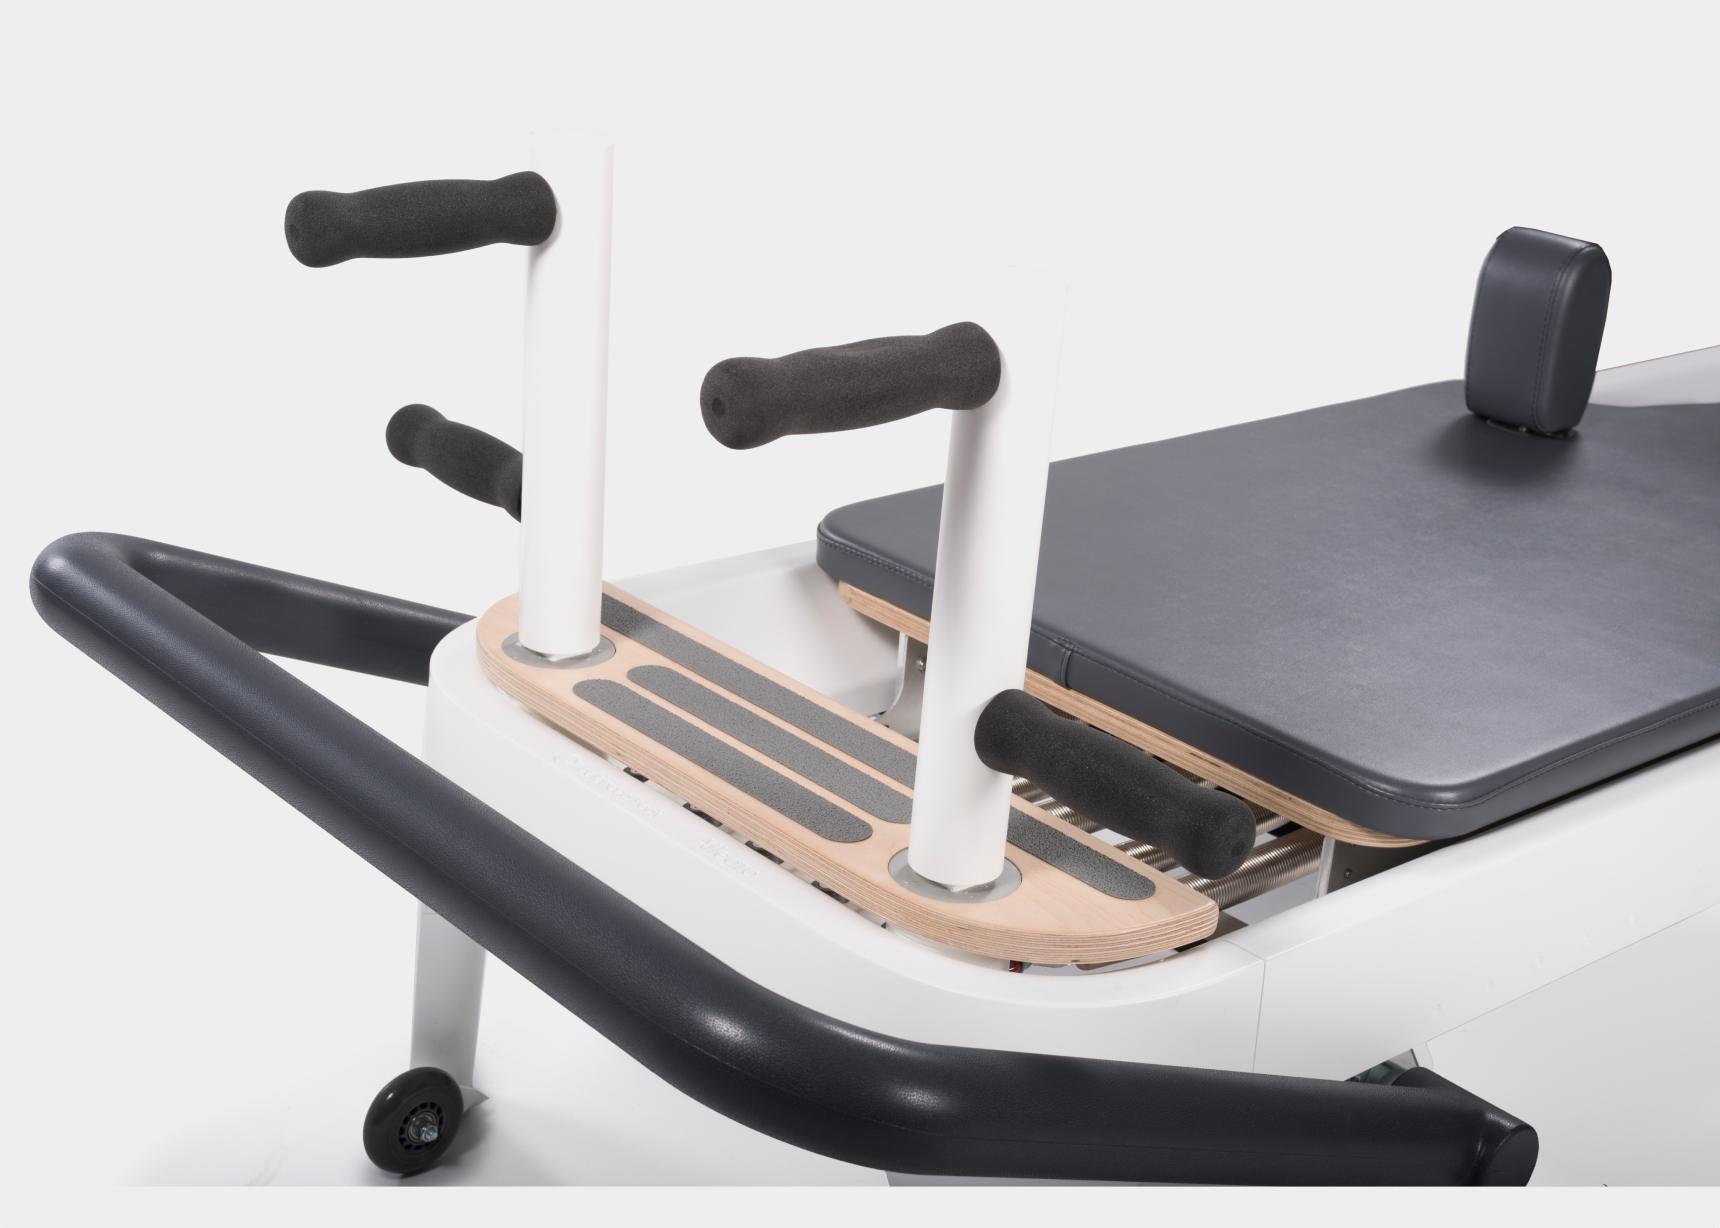 Our Founder began working on the Allegro 2 reformer over 10 years ago  because of its versatility and aesthetic. To this day we are still